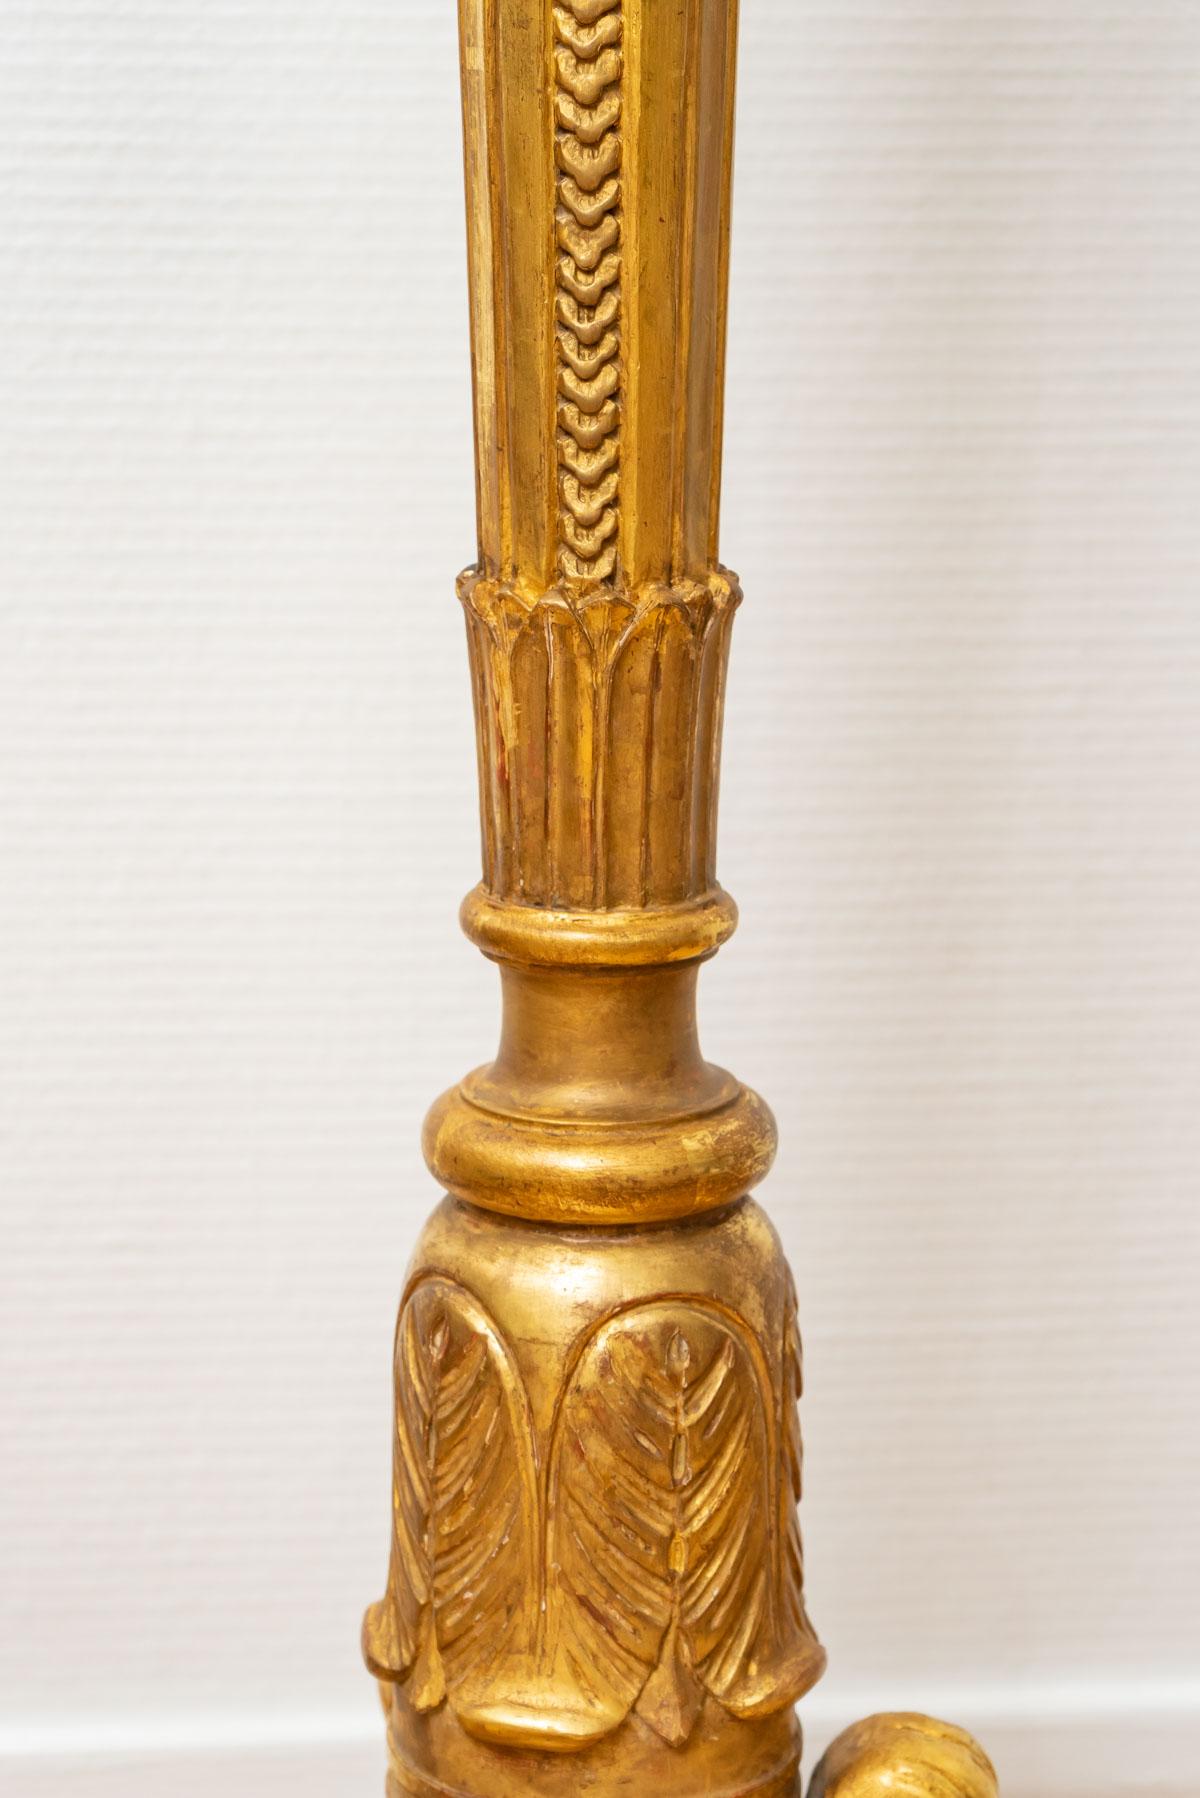 Gilt Large Pic Candle Or Verge Candlestick - Golden Wood With Leaf - Period: XIXth  For Sale